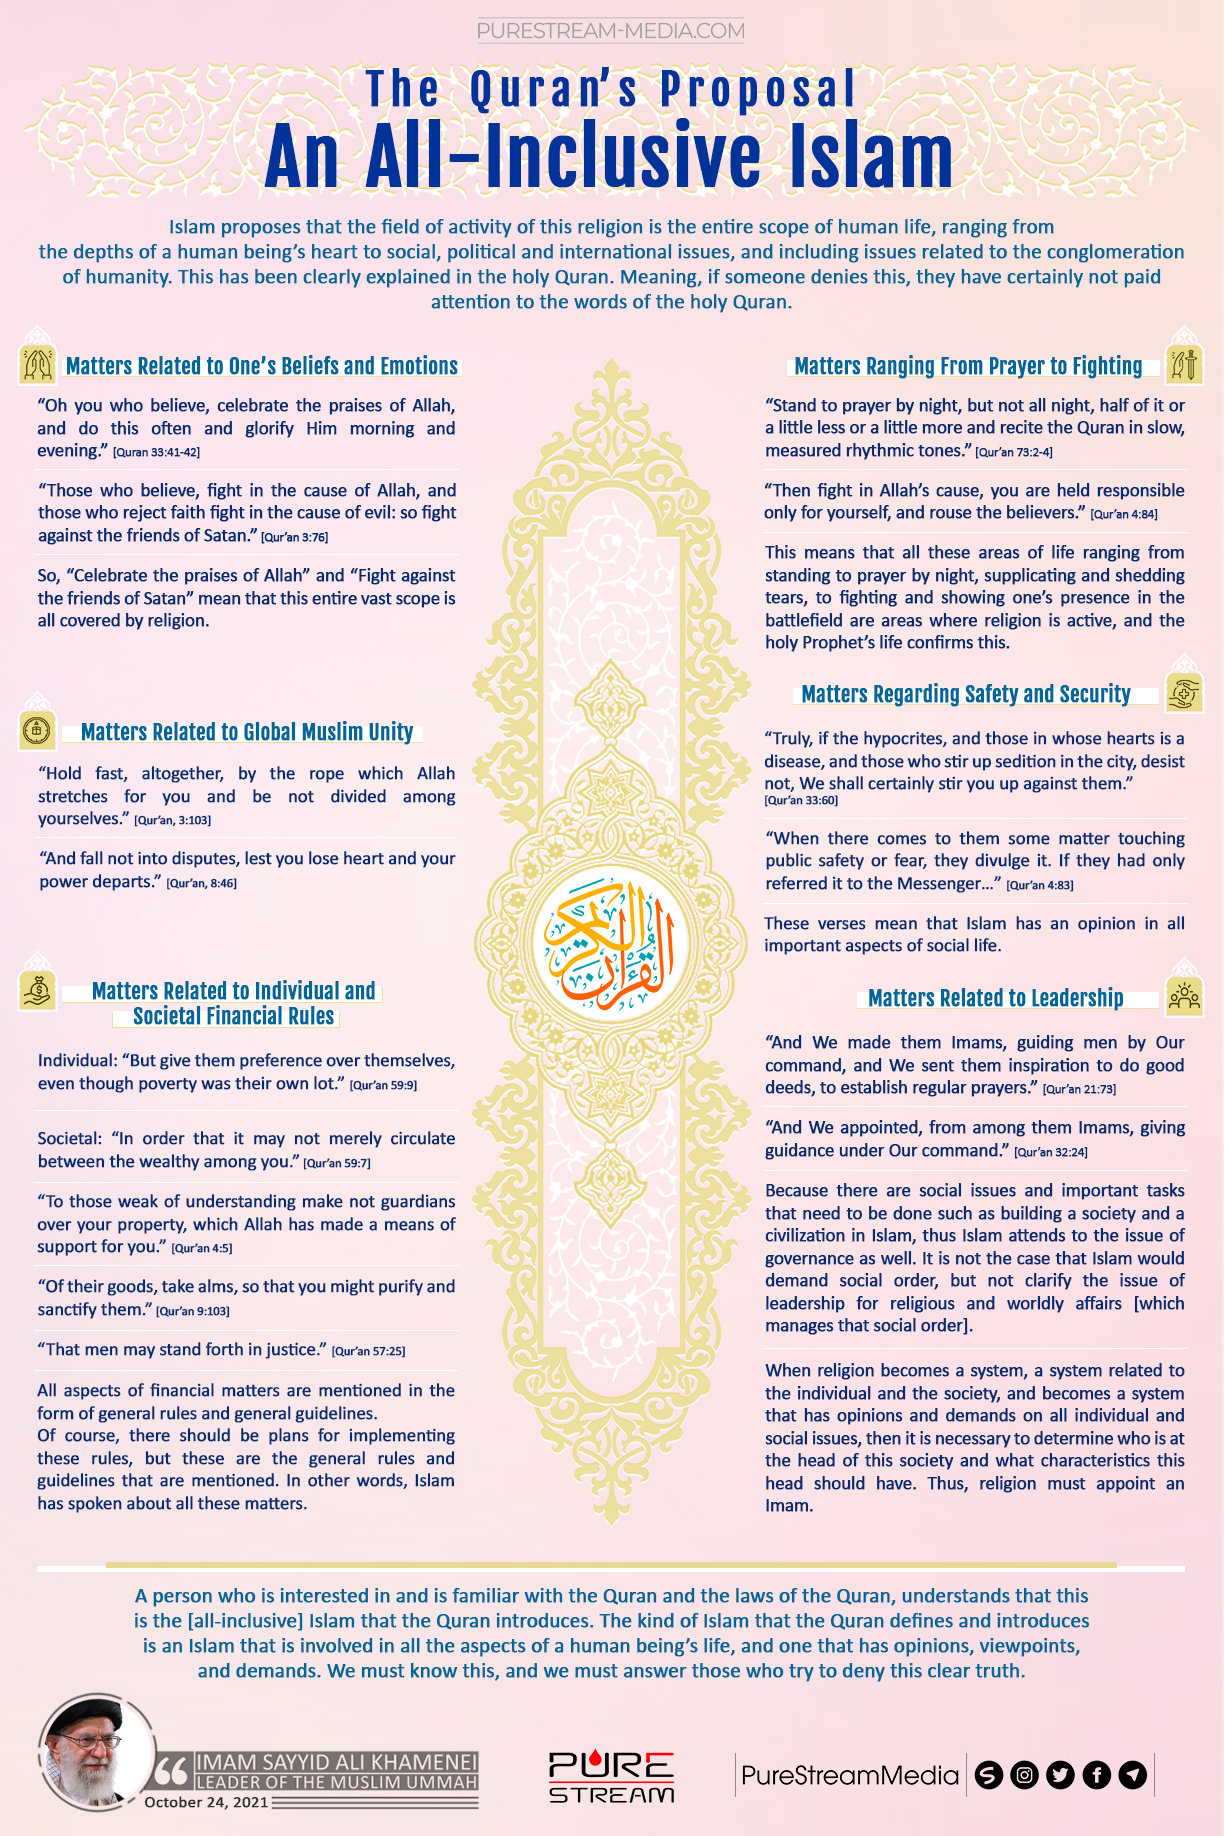 The Quran’s Proposal: An All-Inclusive Islam | Infographic - Pure ...